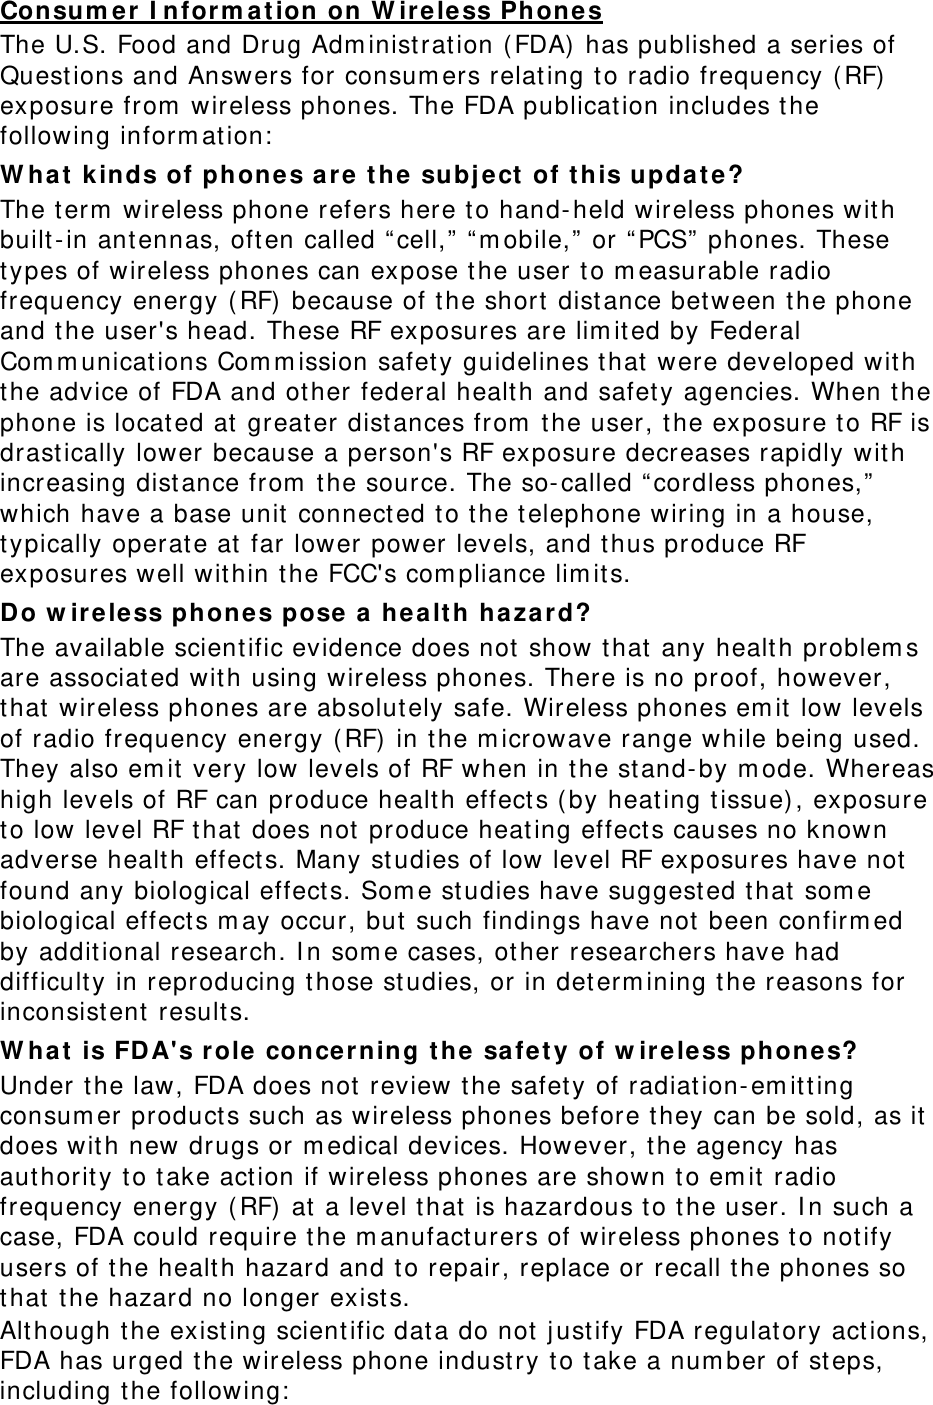 Consum er  I nform a t ion on W ire le ss Phones The U.S. Food and Drug Adm inist rat ion (FDA)  has published a series of Quest ions and Answers for consum ers relat ing t o radio frequency ( RF) exposure from  wireless phones. The FDA publicat ion includes t he following inform at ion:  W ha t  k inds of phones are  t he  subj e ct  of t his updat e? The t erm  wireless phone refers here to hand- held wireless phones wit h built- in antennas, often called “ cell,”  “ m obile,”  or “ PCS”  phones. These types of wireless phones can expose t he user to m easurable radio frequency energy ( RF)  because of t he short dist ance bet ween the phone and t he user&apos;s head. These RF exposures are lim it ed by Federal Com m unicat ions Com m ission safet y guidelines that  were developed with the advice of FDA and other federal health and safet y agencies. When t he phone is locat ed at  great er dist ances from  t he user, t he exposure t o RF is drast ically lower because a person&apos;s RF exposure decreases rapidly with increasing distance from  t he source. The so- called “ cordless phones,”  which have a base unit  connect ed to the t elephone wiring in a house, typically operat e at  far lower power levels, and thus produce RF exposures well wit hin the FCC&apos;s com pliance lim it s. Do w ire less phones pose a  he alt h ha za rd? The available scientific evidence does not  show t hat  any healt h problem s are associat ed wit h using wireless phones. There is no proof, however, that  wireless phones are absolut ely safe. Wireless phones em it  low levels of radio frequency energy ( RF) in the m icrowave range while being used. They also em it  very low levels of RF when in the st and- by m ode. Whereas high levels of RF can produce health effect s (by heating tissue) , exposure to low level RF that does not produce heating effect s causes no known adverse healt h effect s. Many st udies of low level RF exposures have not  found any biological effect s. Som e st udies have suggest ed t hat  som e biological effect s m ay occur, but such findings have not  been confirm ed by addit ional research. I n som e cases, ot her researchers have had difficult y in reproducing those st udies, or in det erm ining the reasons for inconsist ent  result s. W ha t  is FDA&apos;s role concer ning t he sa fet y of w ire less phones? Under t he law, FDA does not  review t he safet y of radiation-em it ting consum er product s such as wireless phones before they can be sold, as it does wit h new drugs or m edical devices. However, t he agency has aut horit y t o take act ion if wireless phones are shown t o em it  radio frequency energy ( RF)  at  a level t hat  is hazardous t o t he user. I n such a case, FDA could require t he m anufact urers of wireless phones t o not ify users of the healt h hazard and t o repair, replace or recall t he phones so that  t he hazard no longer exist s. Although t he exist ing scientific dat a do not  j ust ify FDA regulatory act ions, FDA has urged t he wireless phone indust ry to t ake a num ber of st eps, including t he following:  